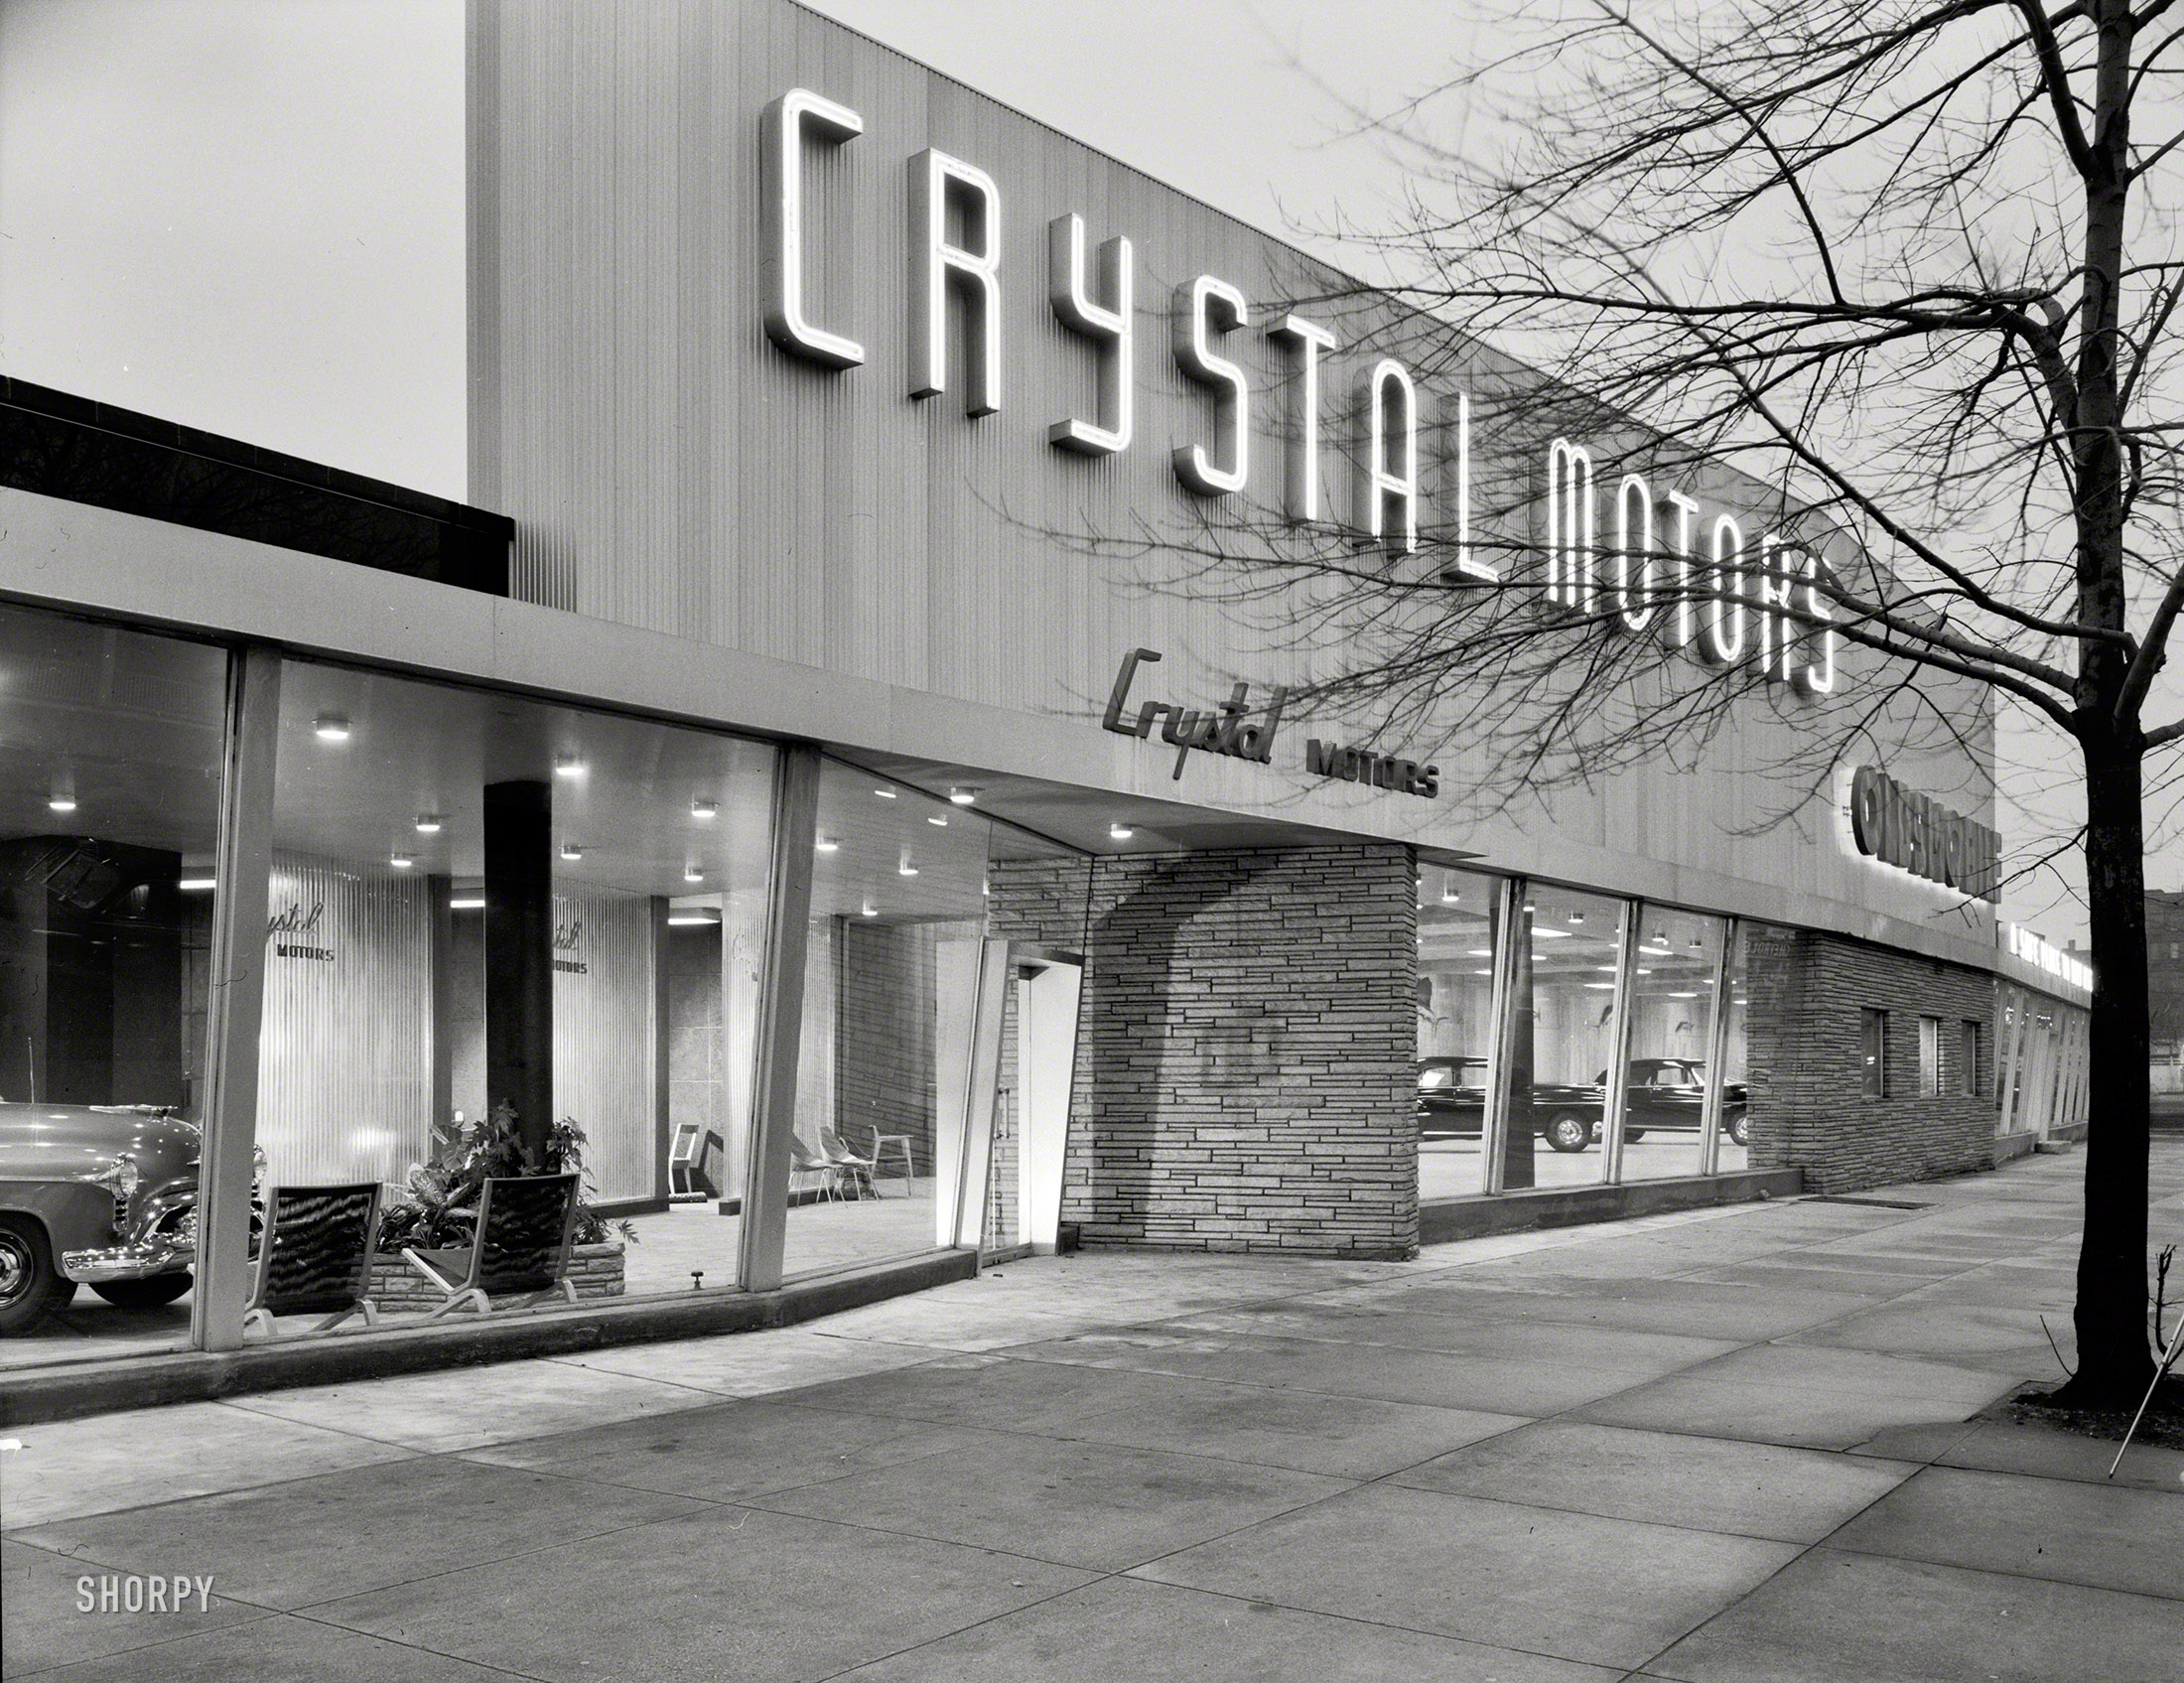 Feb. 15, 1950. "Crystal Motors, business at 5901 Bay Parkway, Brooklyn, New York. Exterior I." The Oldsmobile emporium last glimpsed here. Large-format acetate negative by Gottscho-Schleisner. View full size.